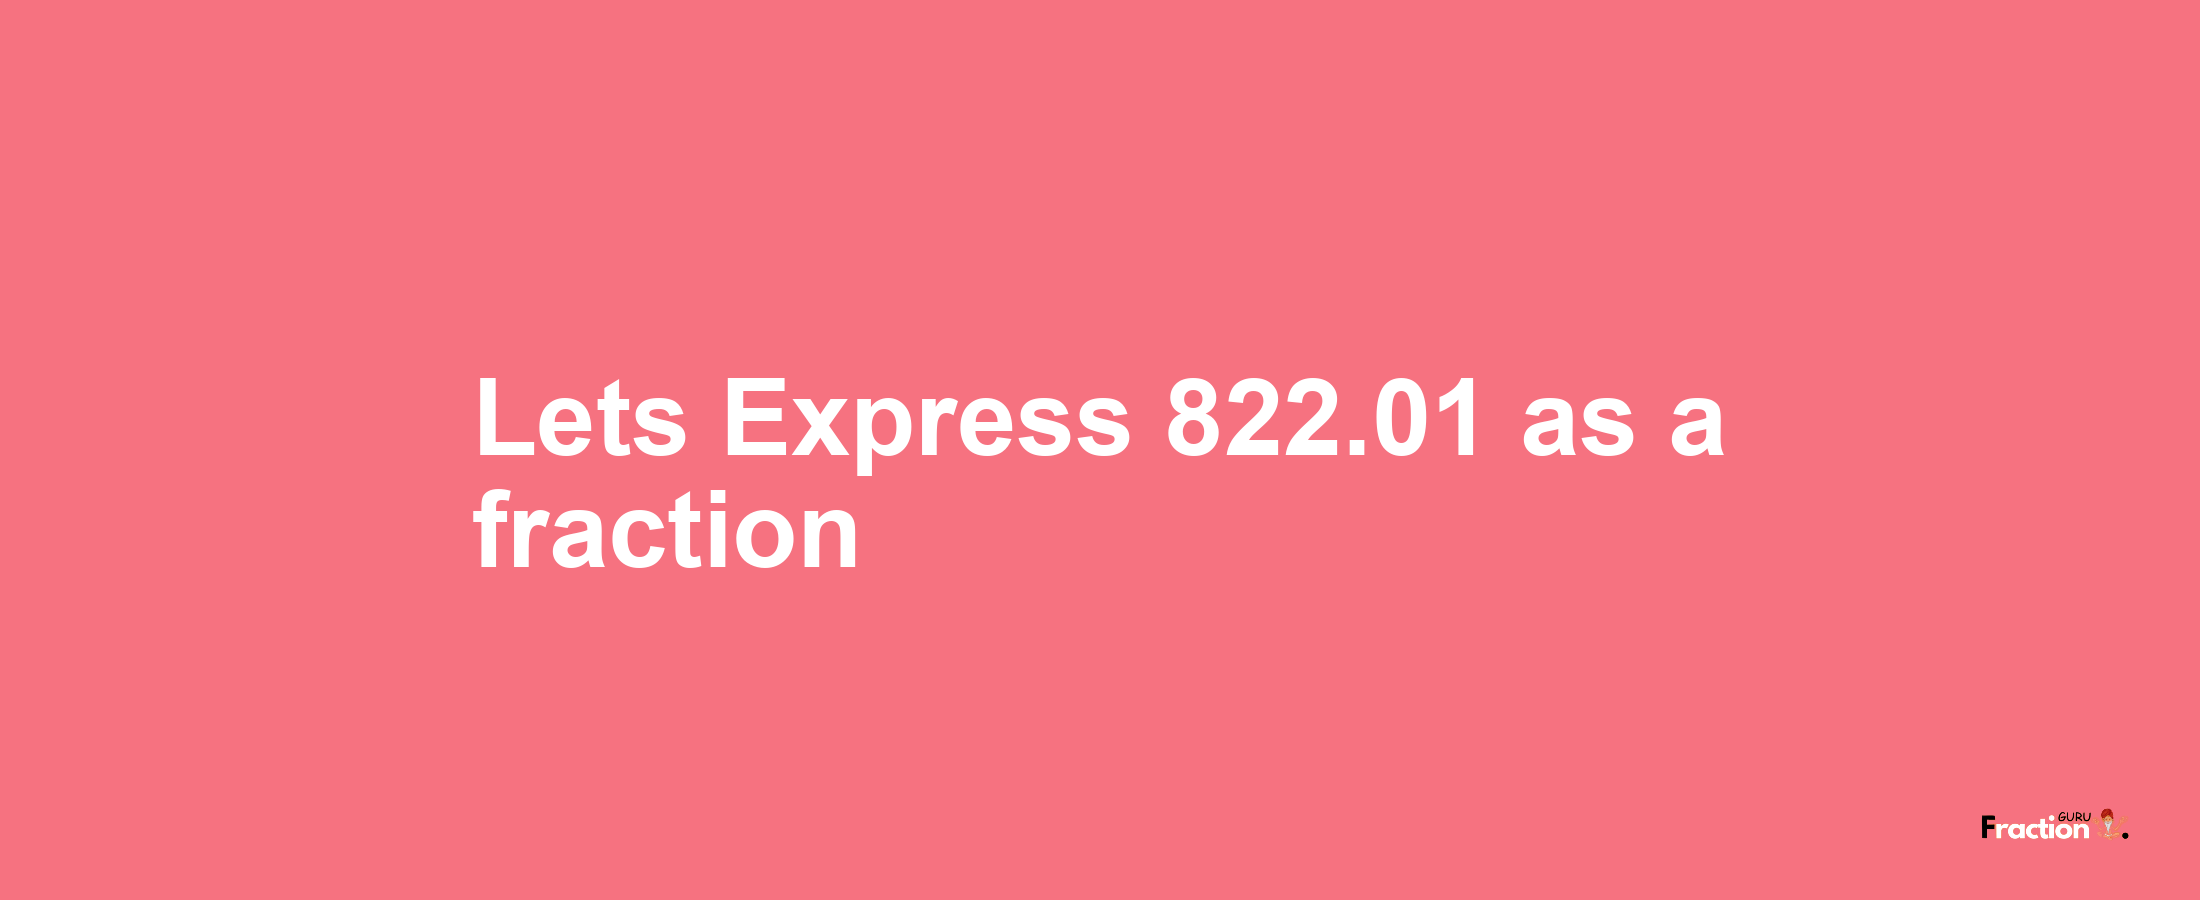 Lets Express 822.01 as afraction